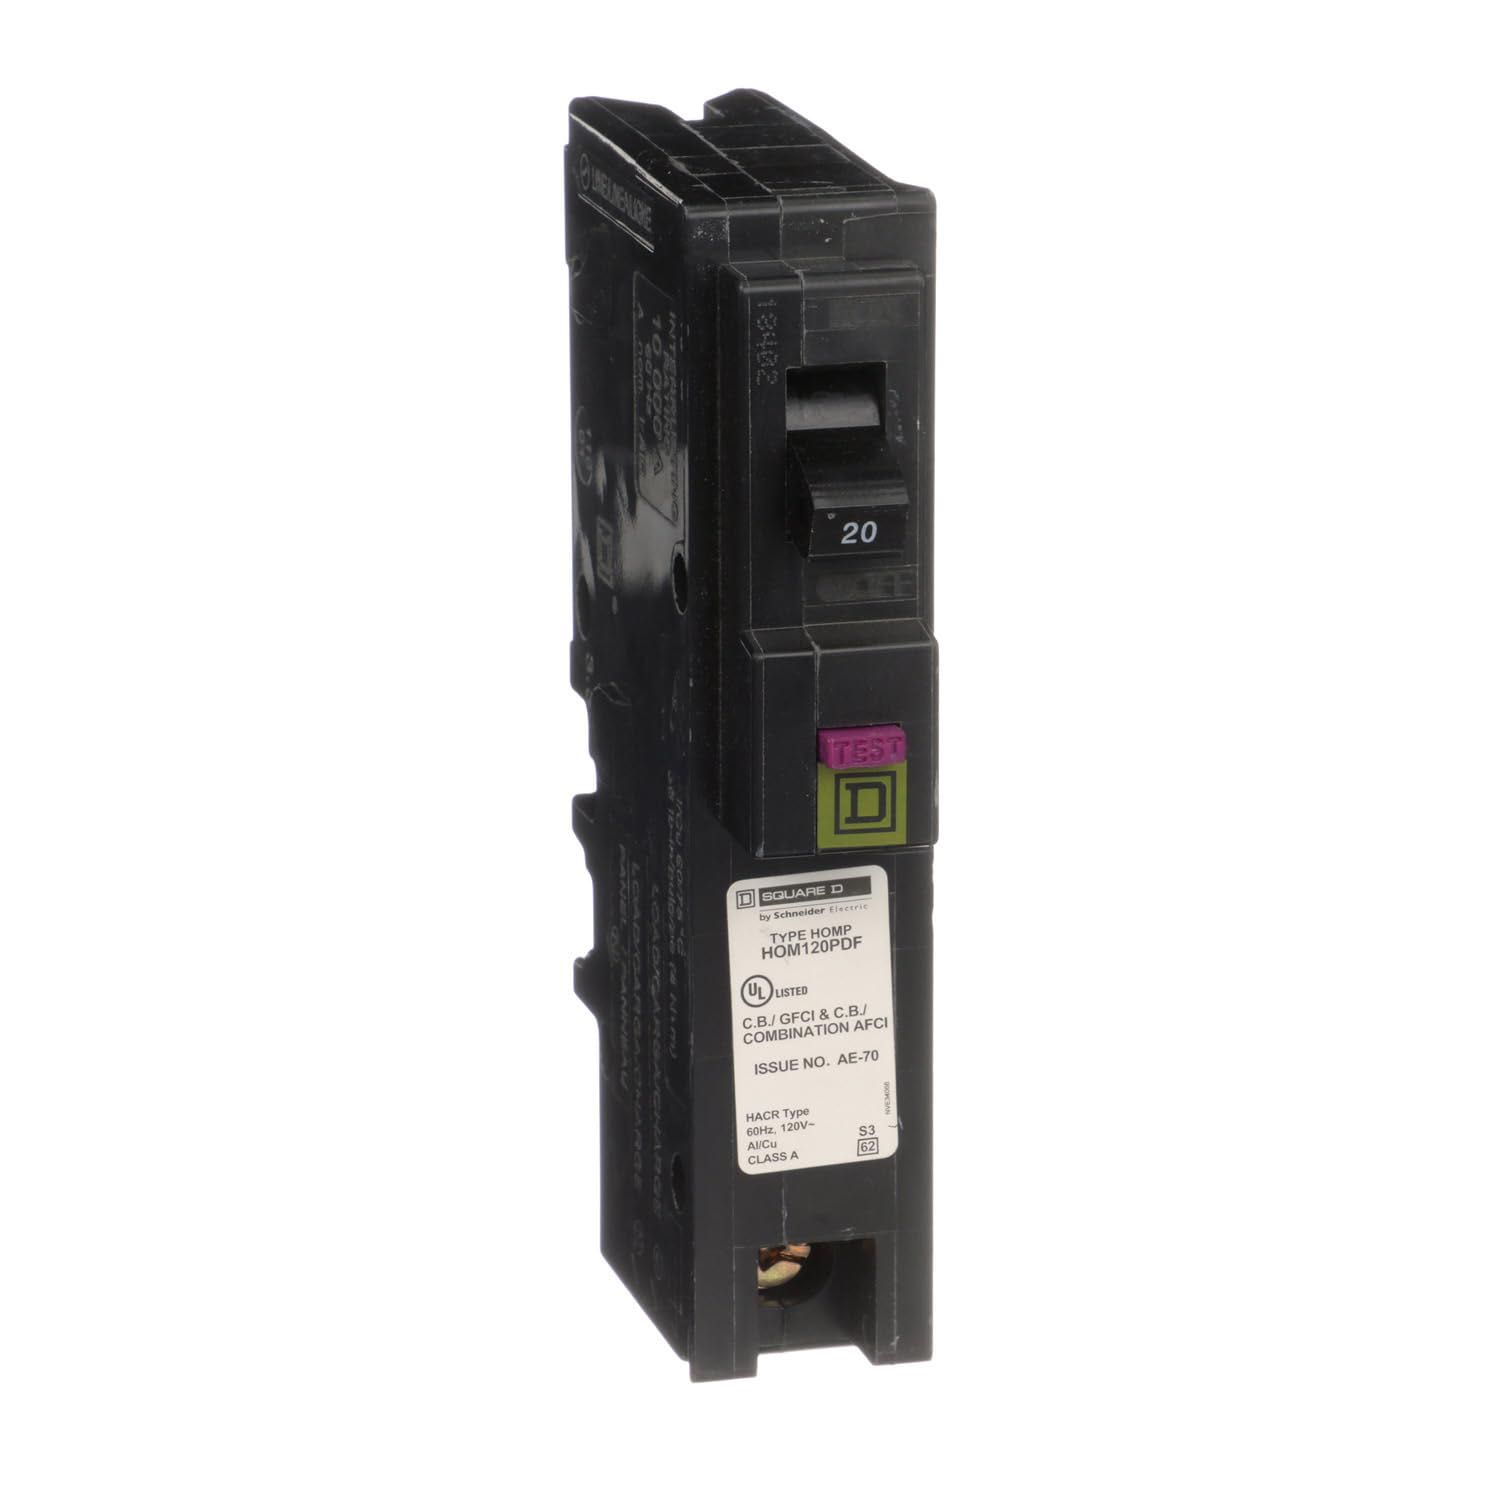 The Square D 20 Amp Dual-Function Circuit Breaker on a white background.